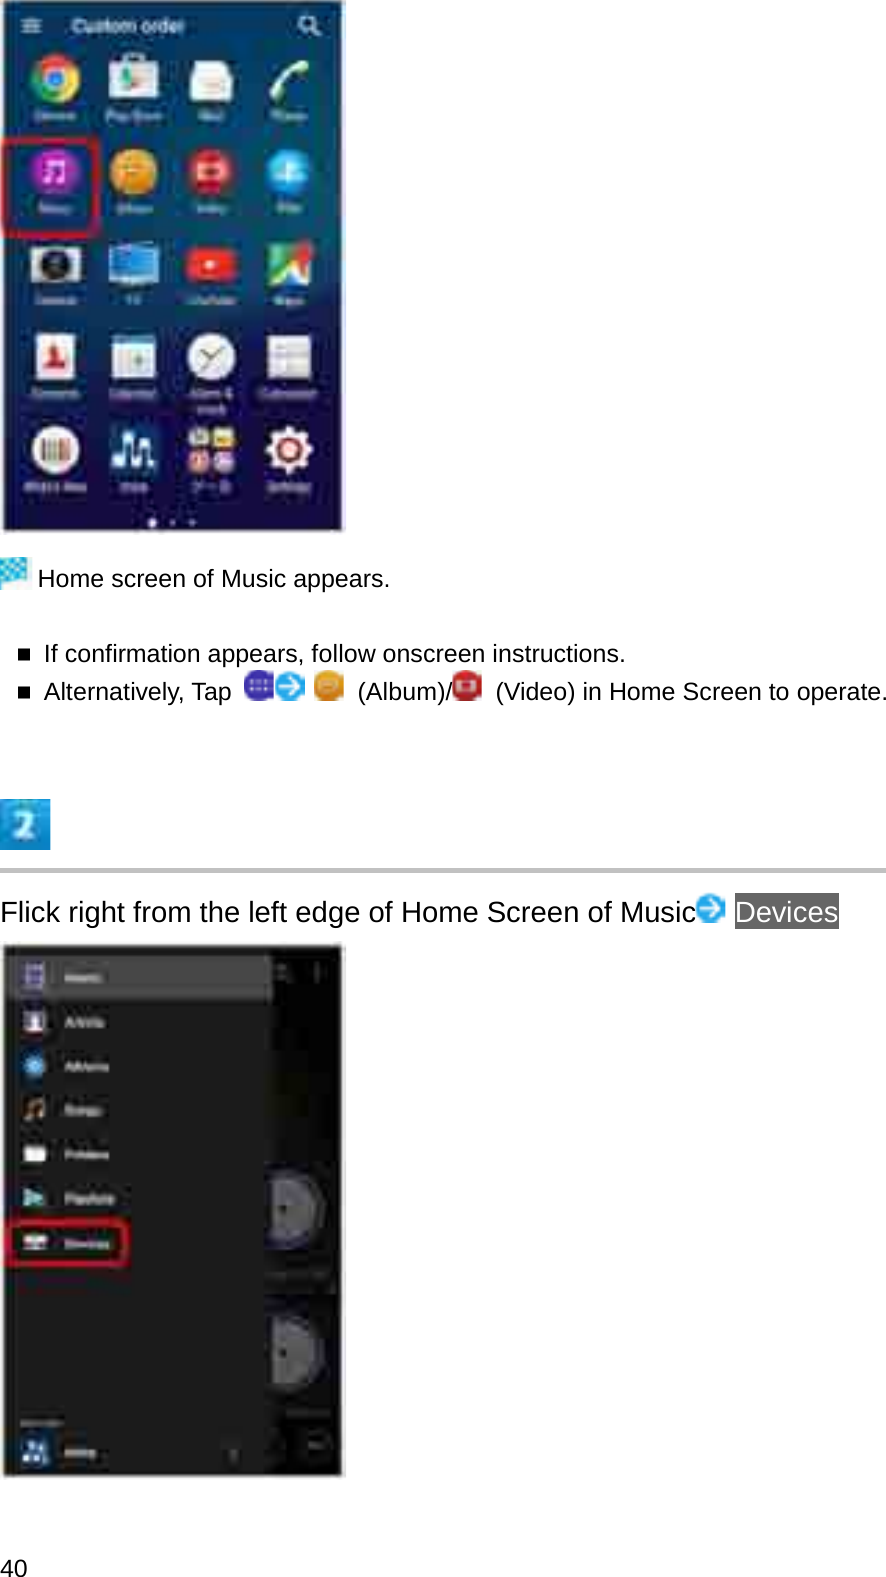 Home screen of Music appears.If confirmation appears, follow onscreen instructions.Alternatively, Tap  (Album)/ (Video) in Home Screen to operate.Flick right from the left edge of Home Screen of Music Devices40